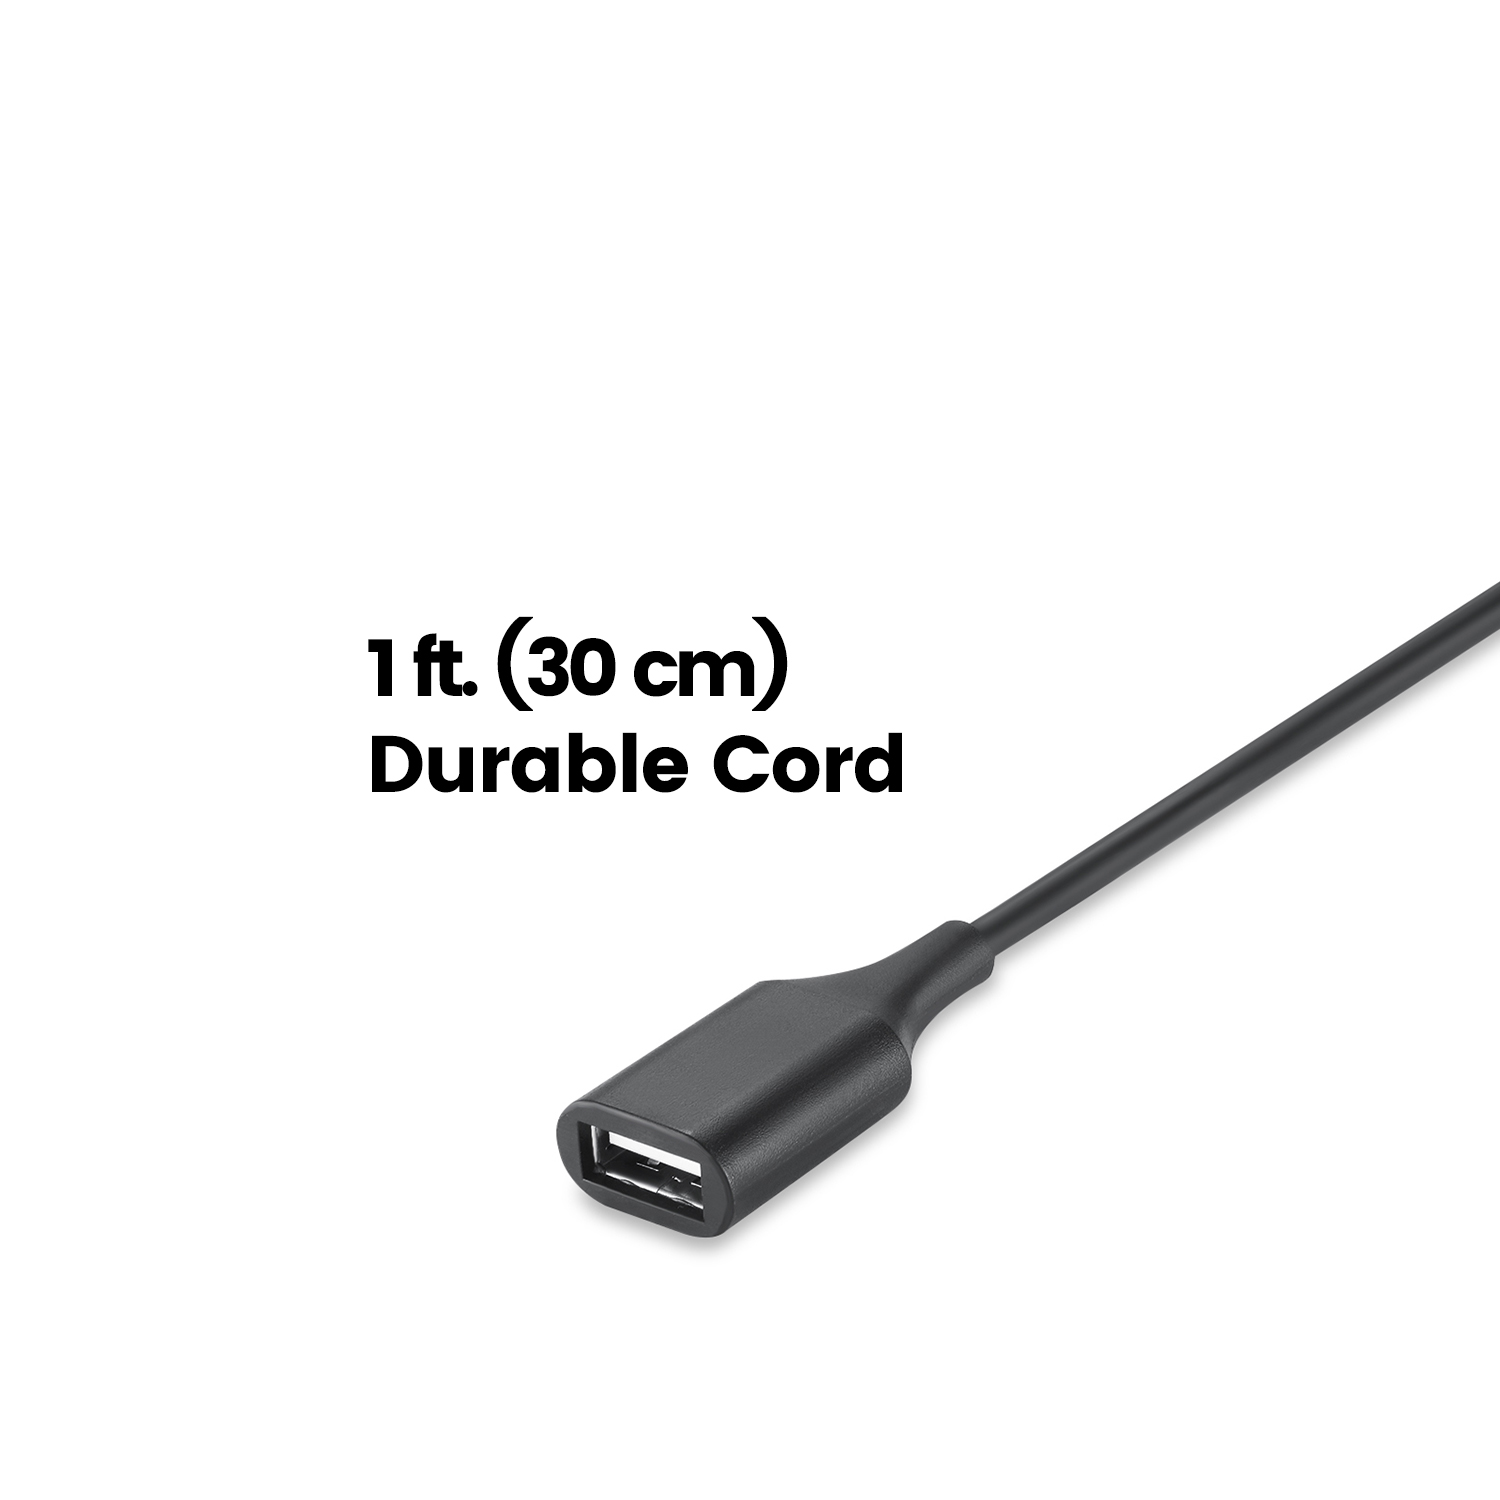 Suitable for Cable Extension